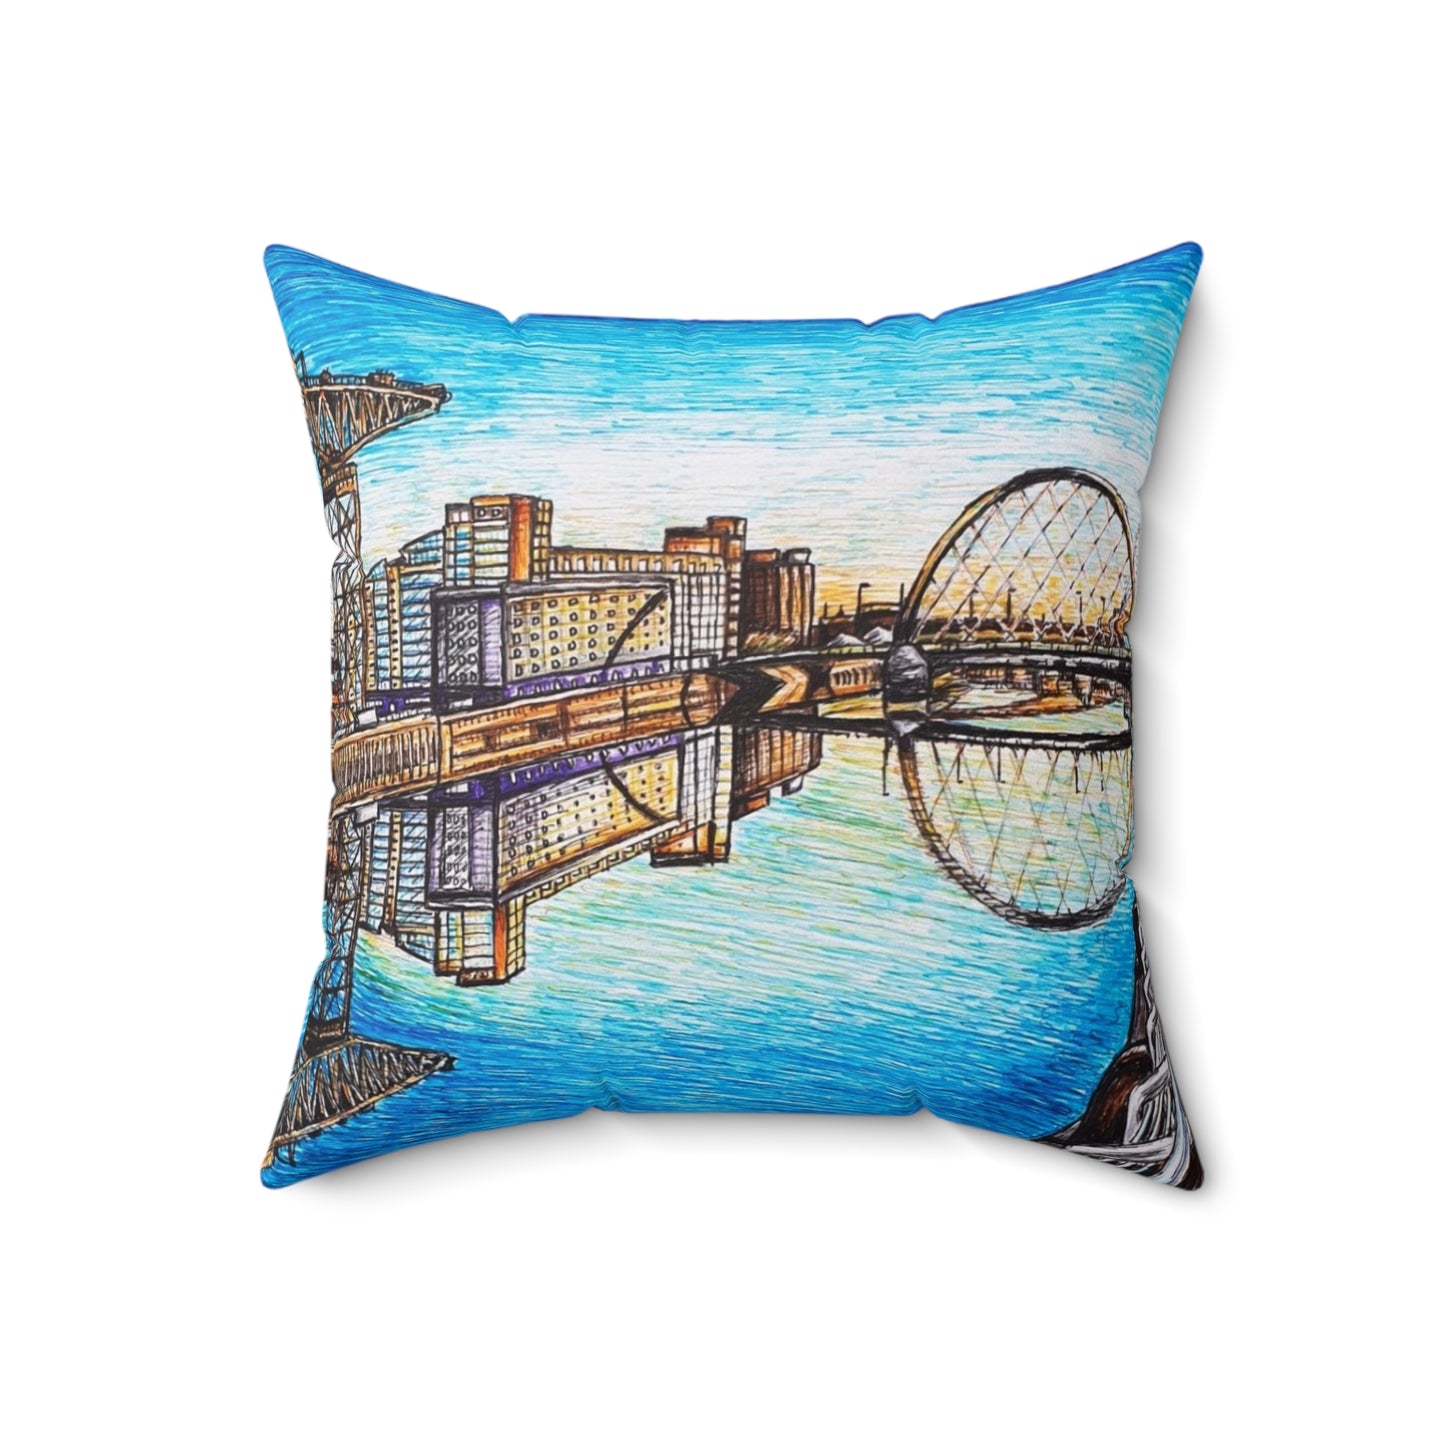 Indoor decorative cushion- Glasgow River Clyde